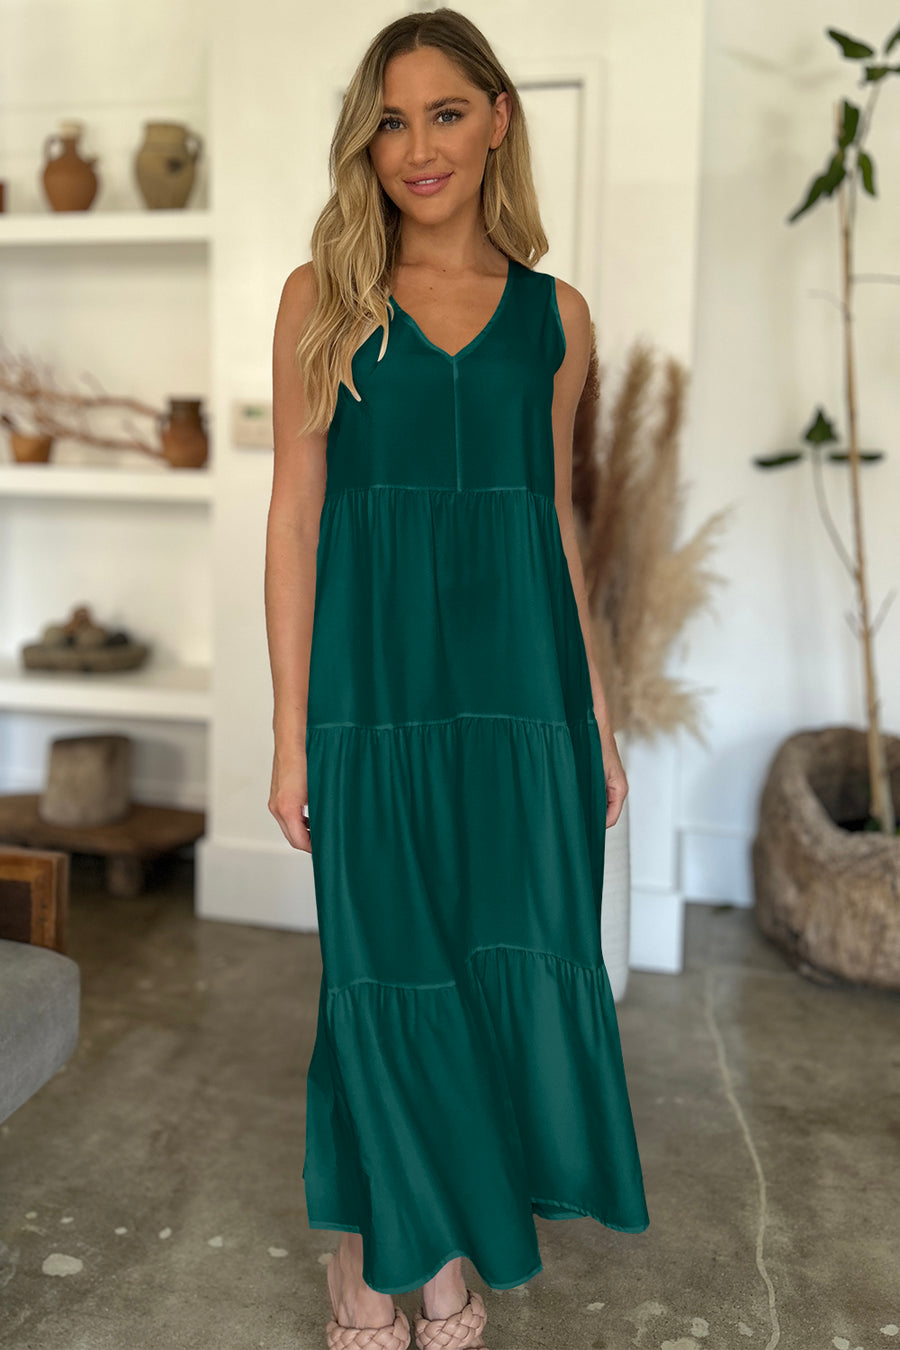 Go For the Green Midi Tiered Dress